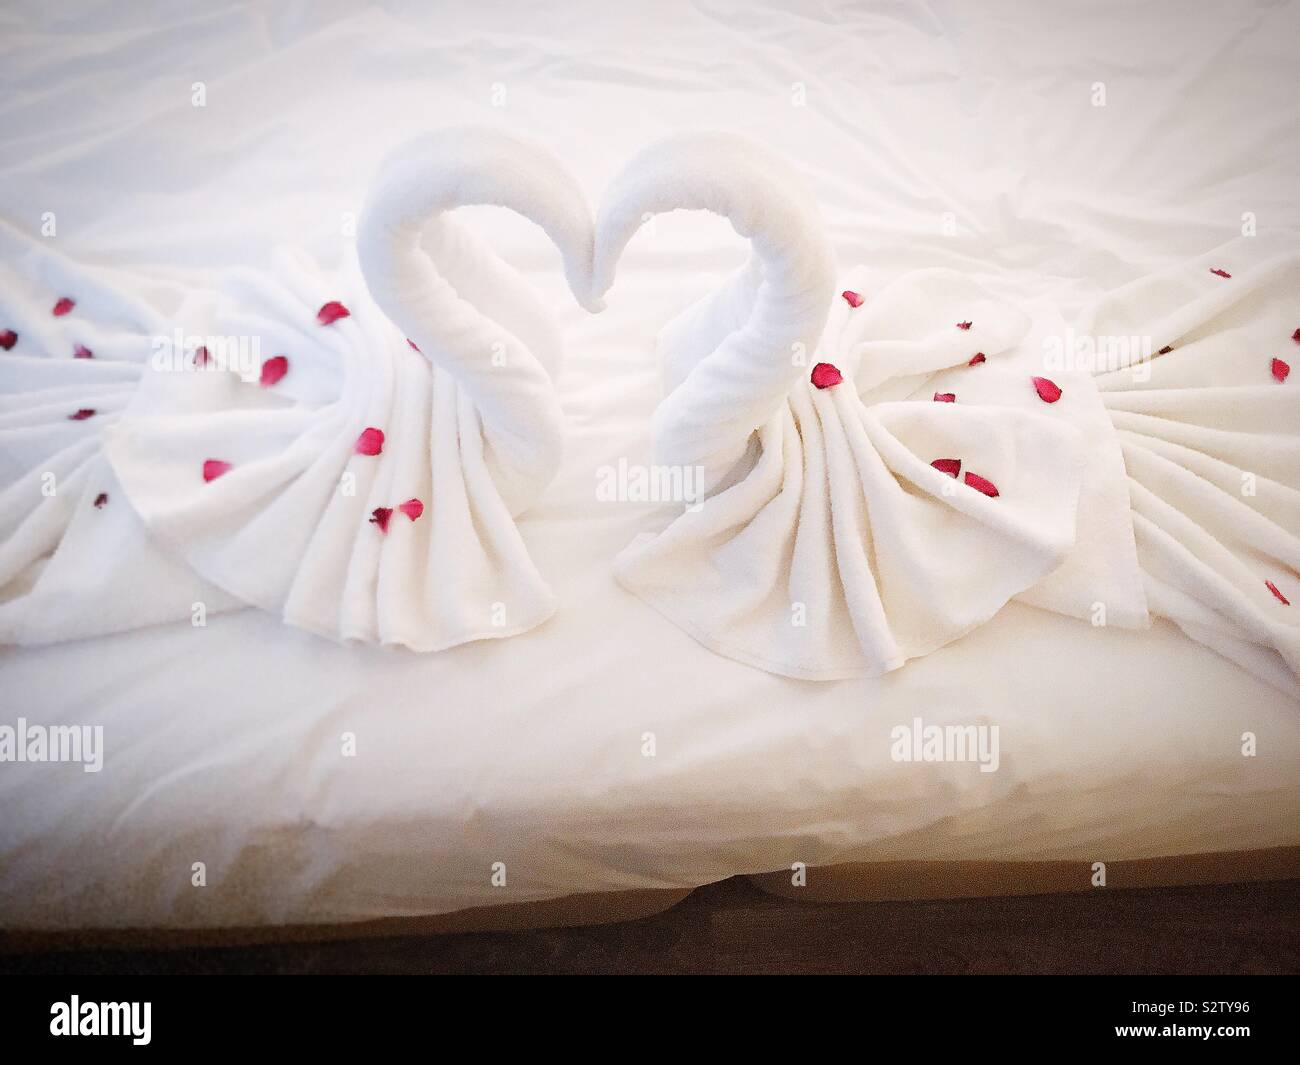 Honeymoon swan heart, wedding heart with rose petals on the bed Stock Photo